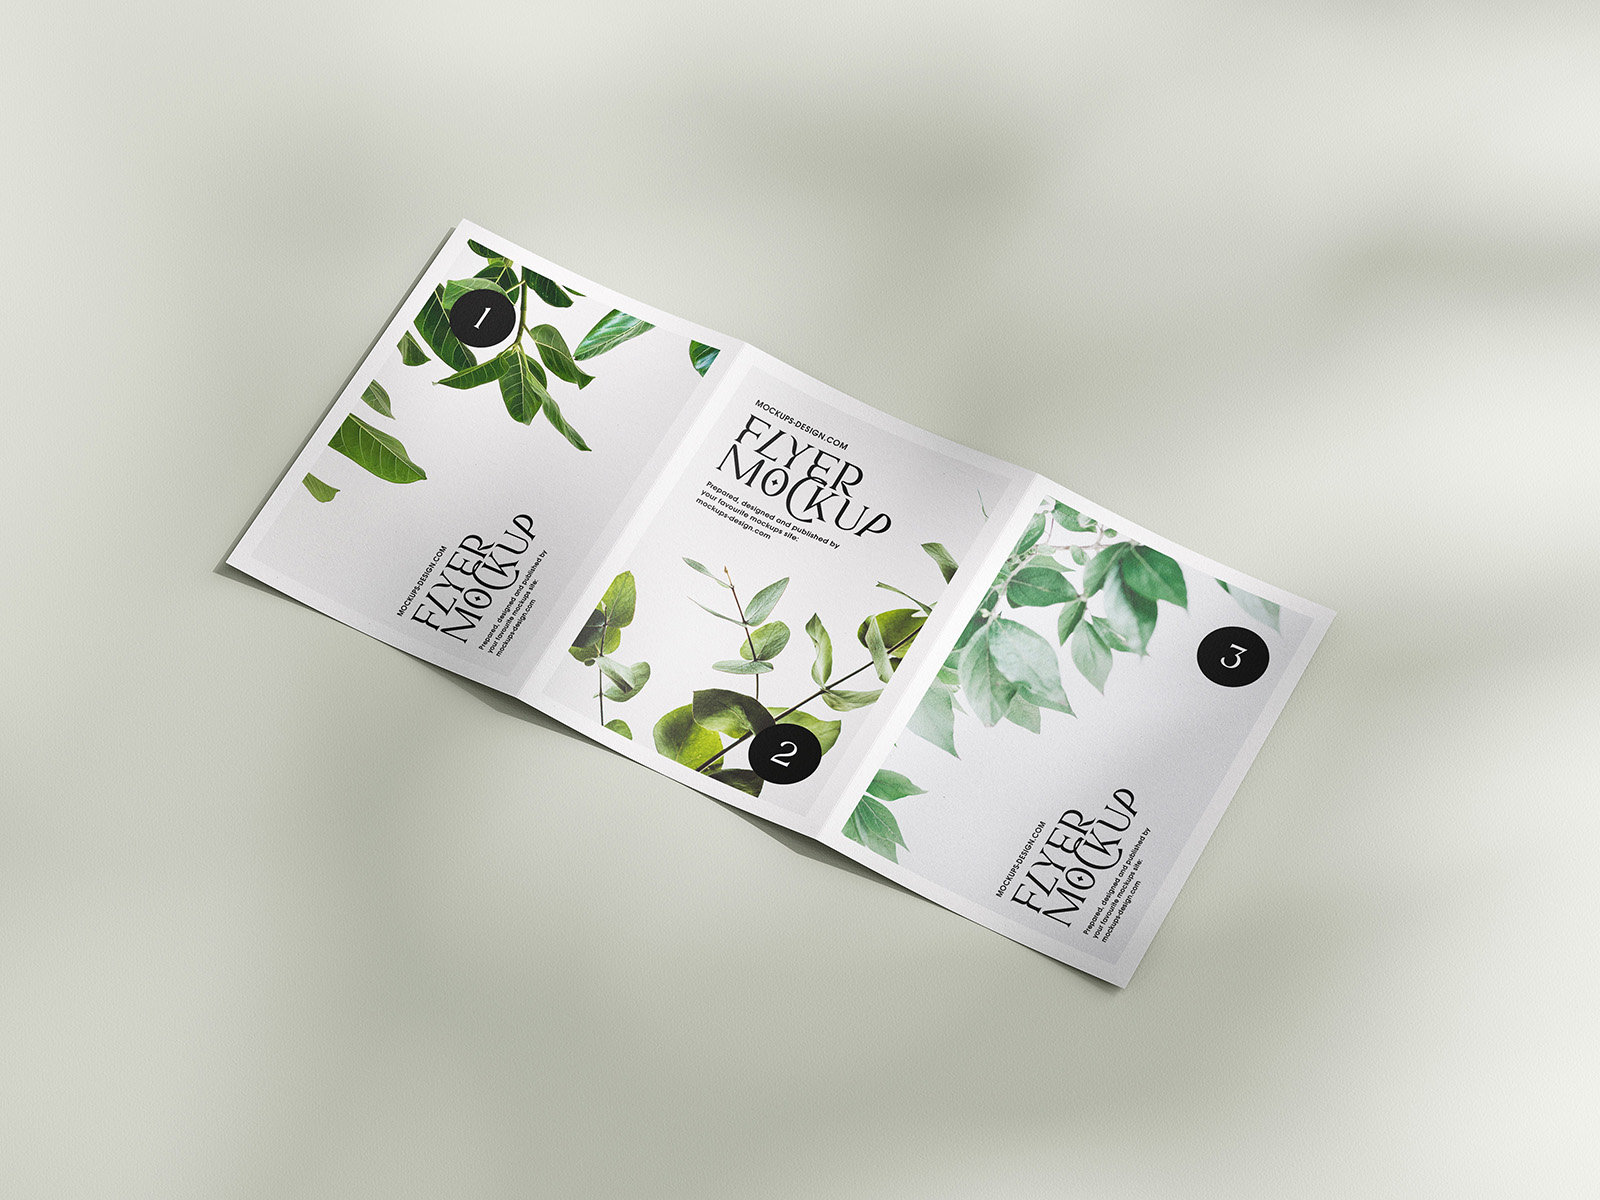 5 Mockups of A5, A6, A4 Trifold Flyers in Various Views FREE PSD